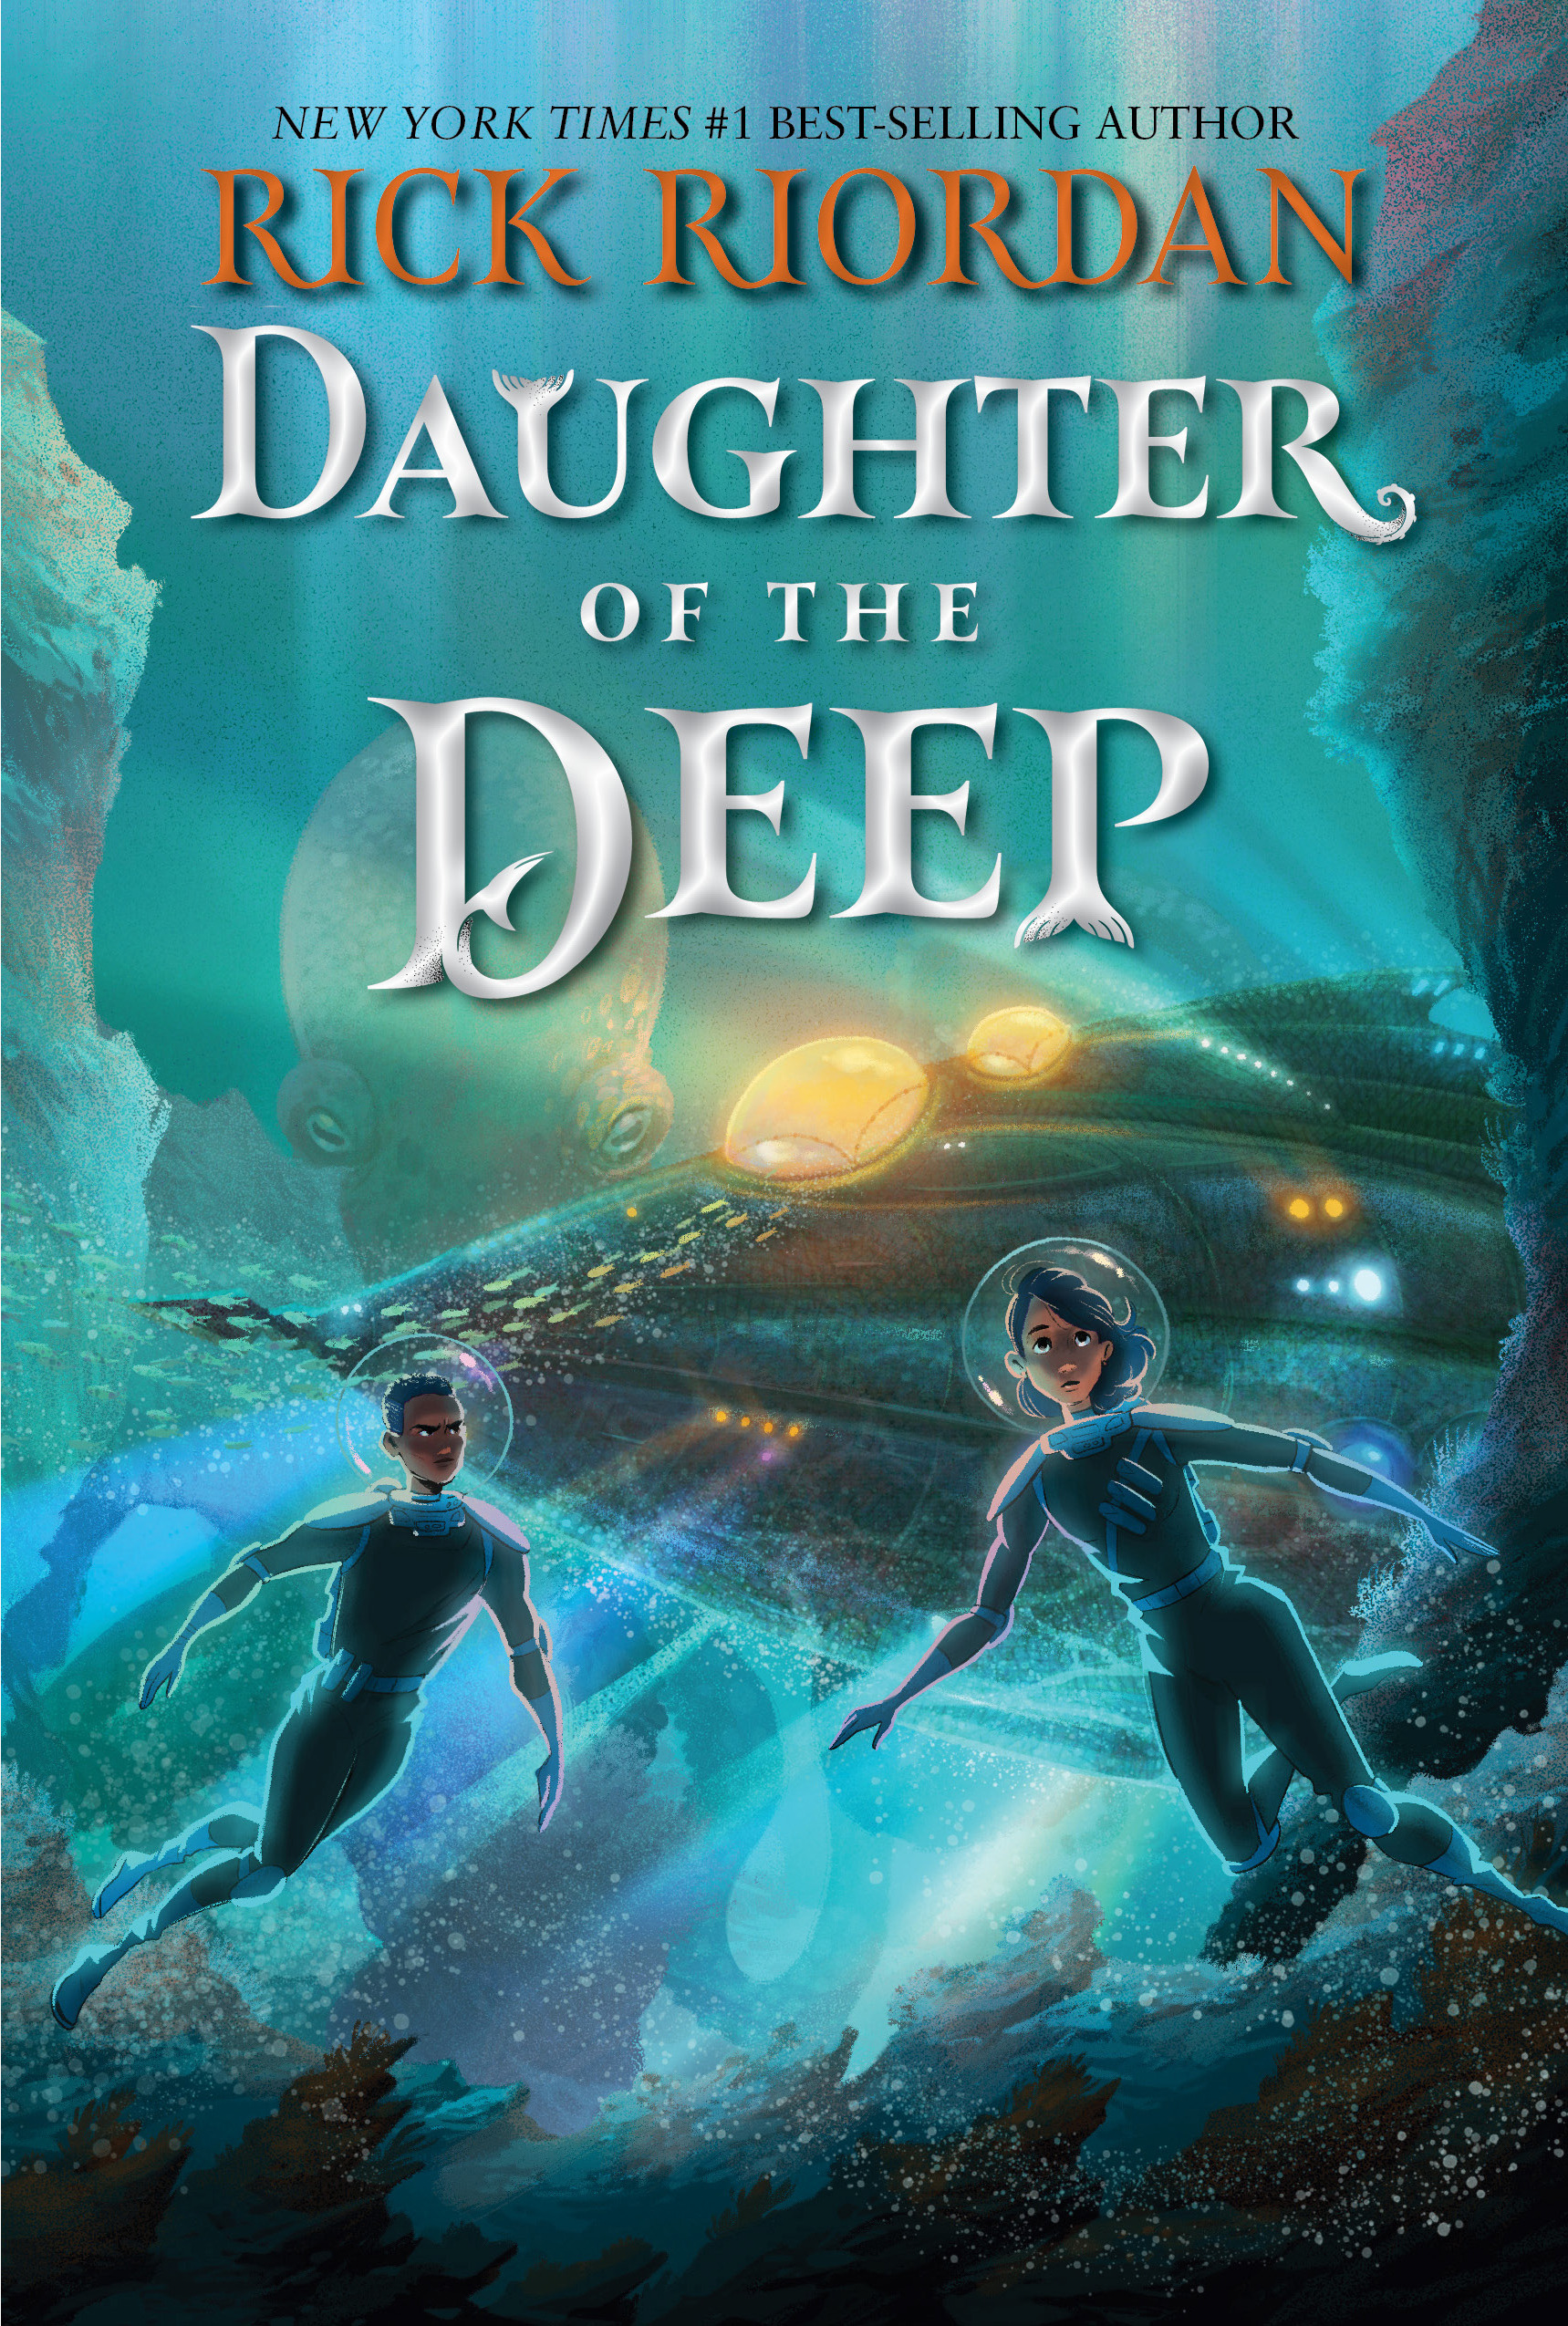 Daughter of the Deep | 9-12 years old